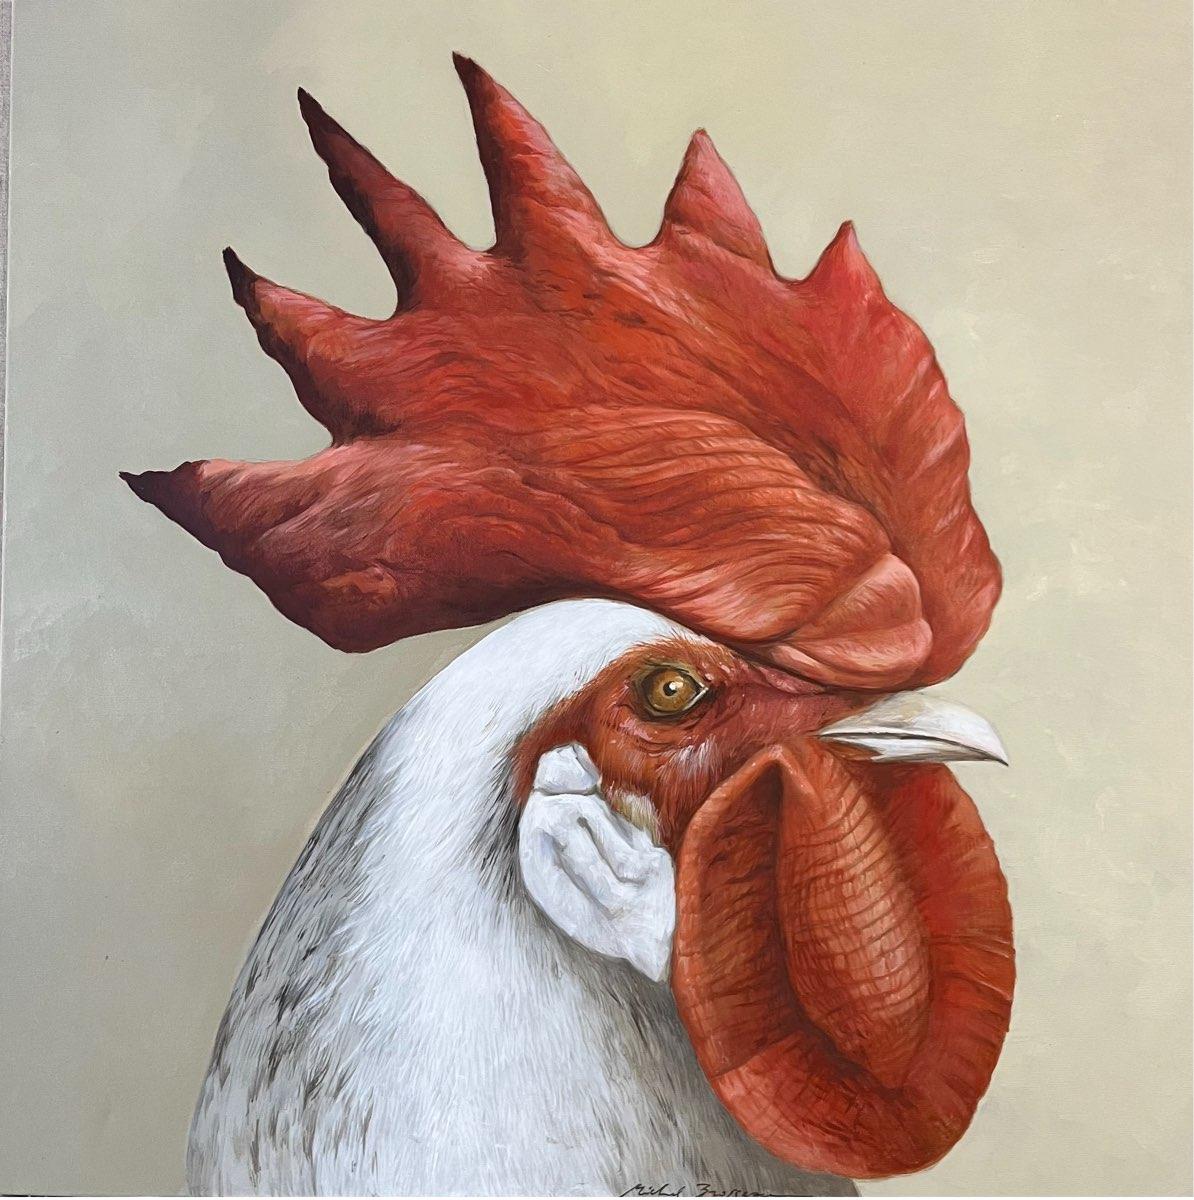 "Liberté", a photorealist side profile of a rooster with a proud red features